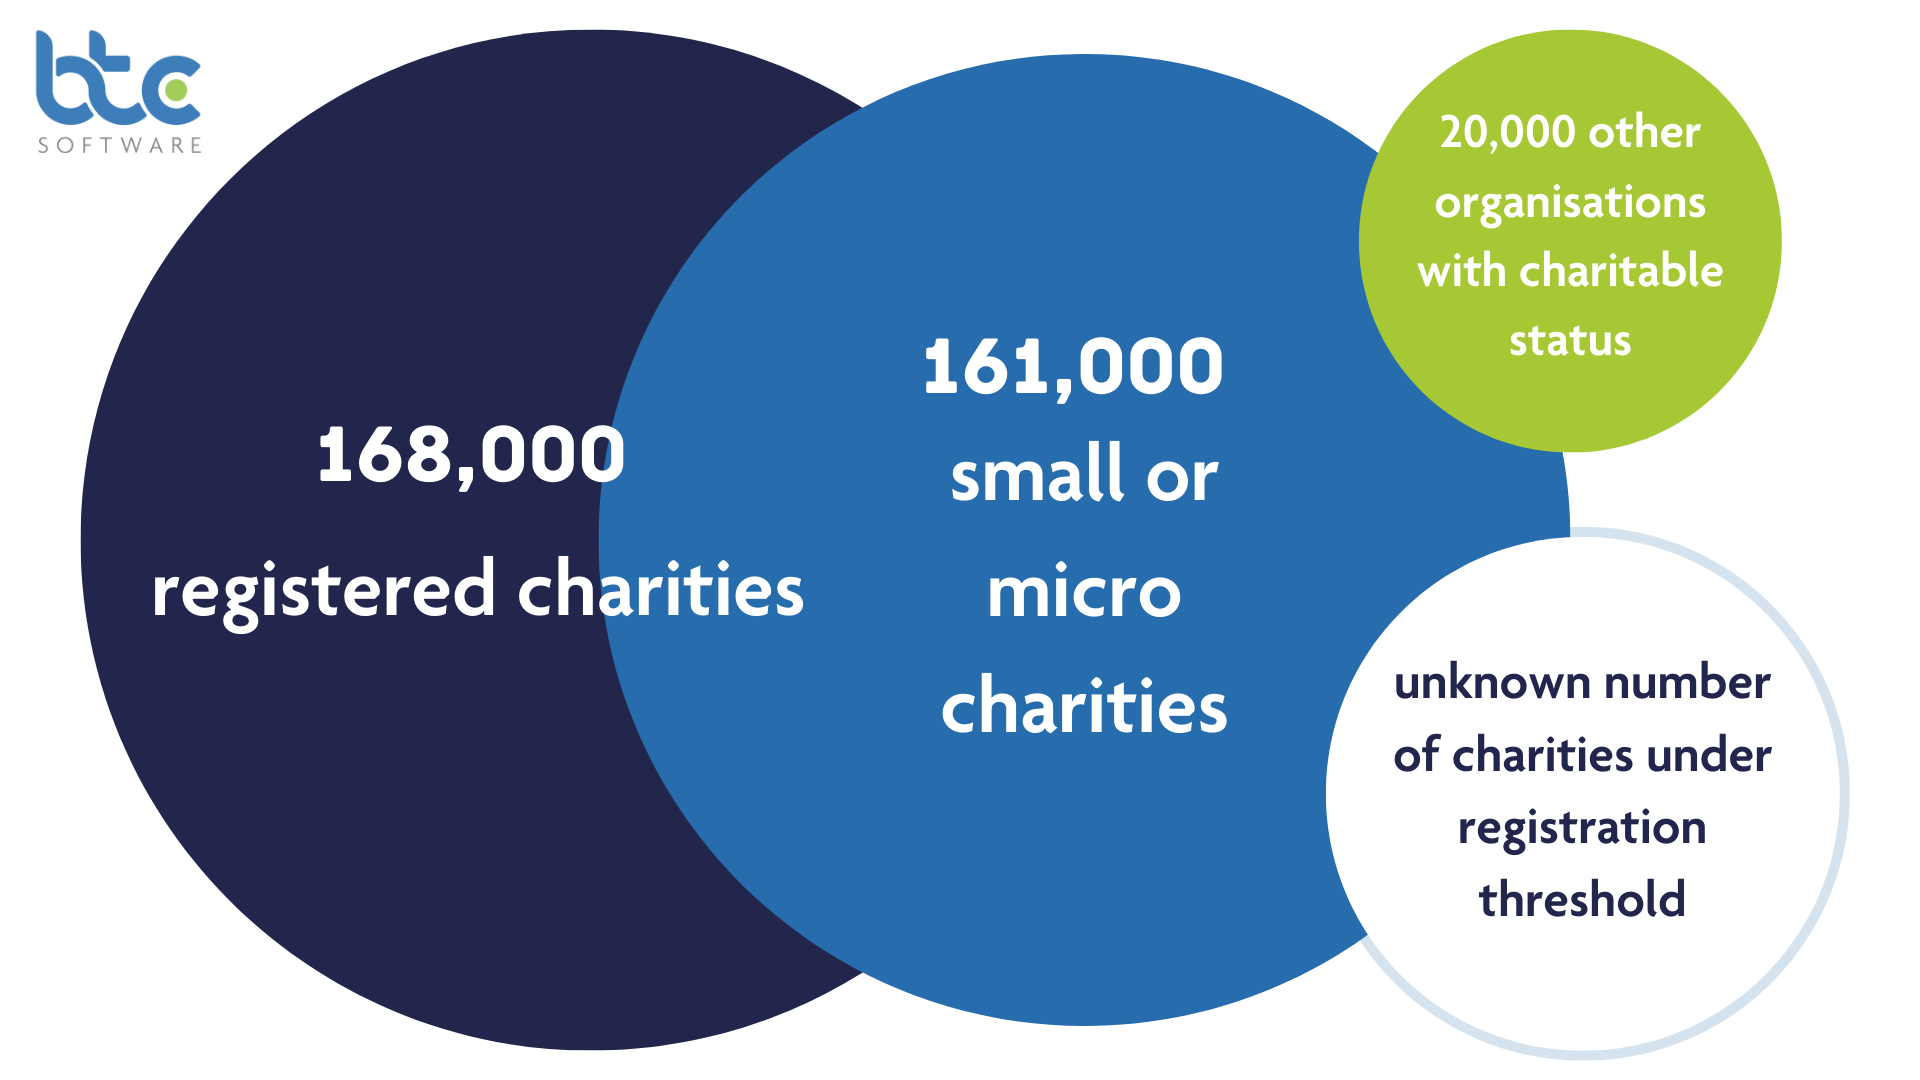 diagram showing the statistics on the charity sector in the paragraph below